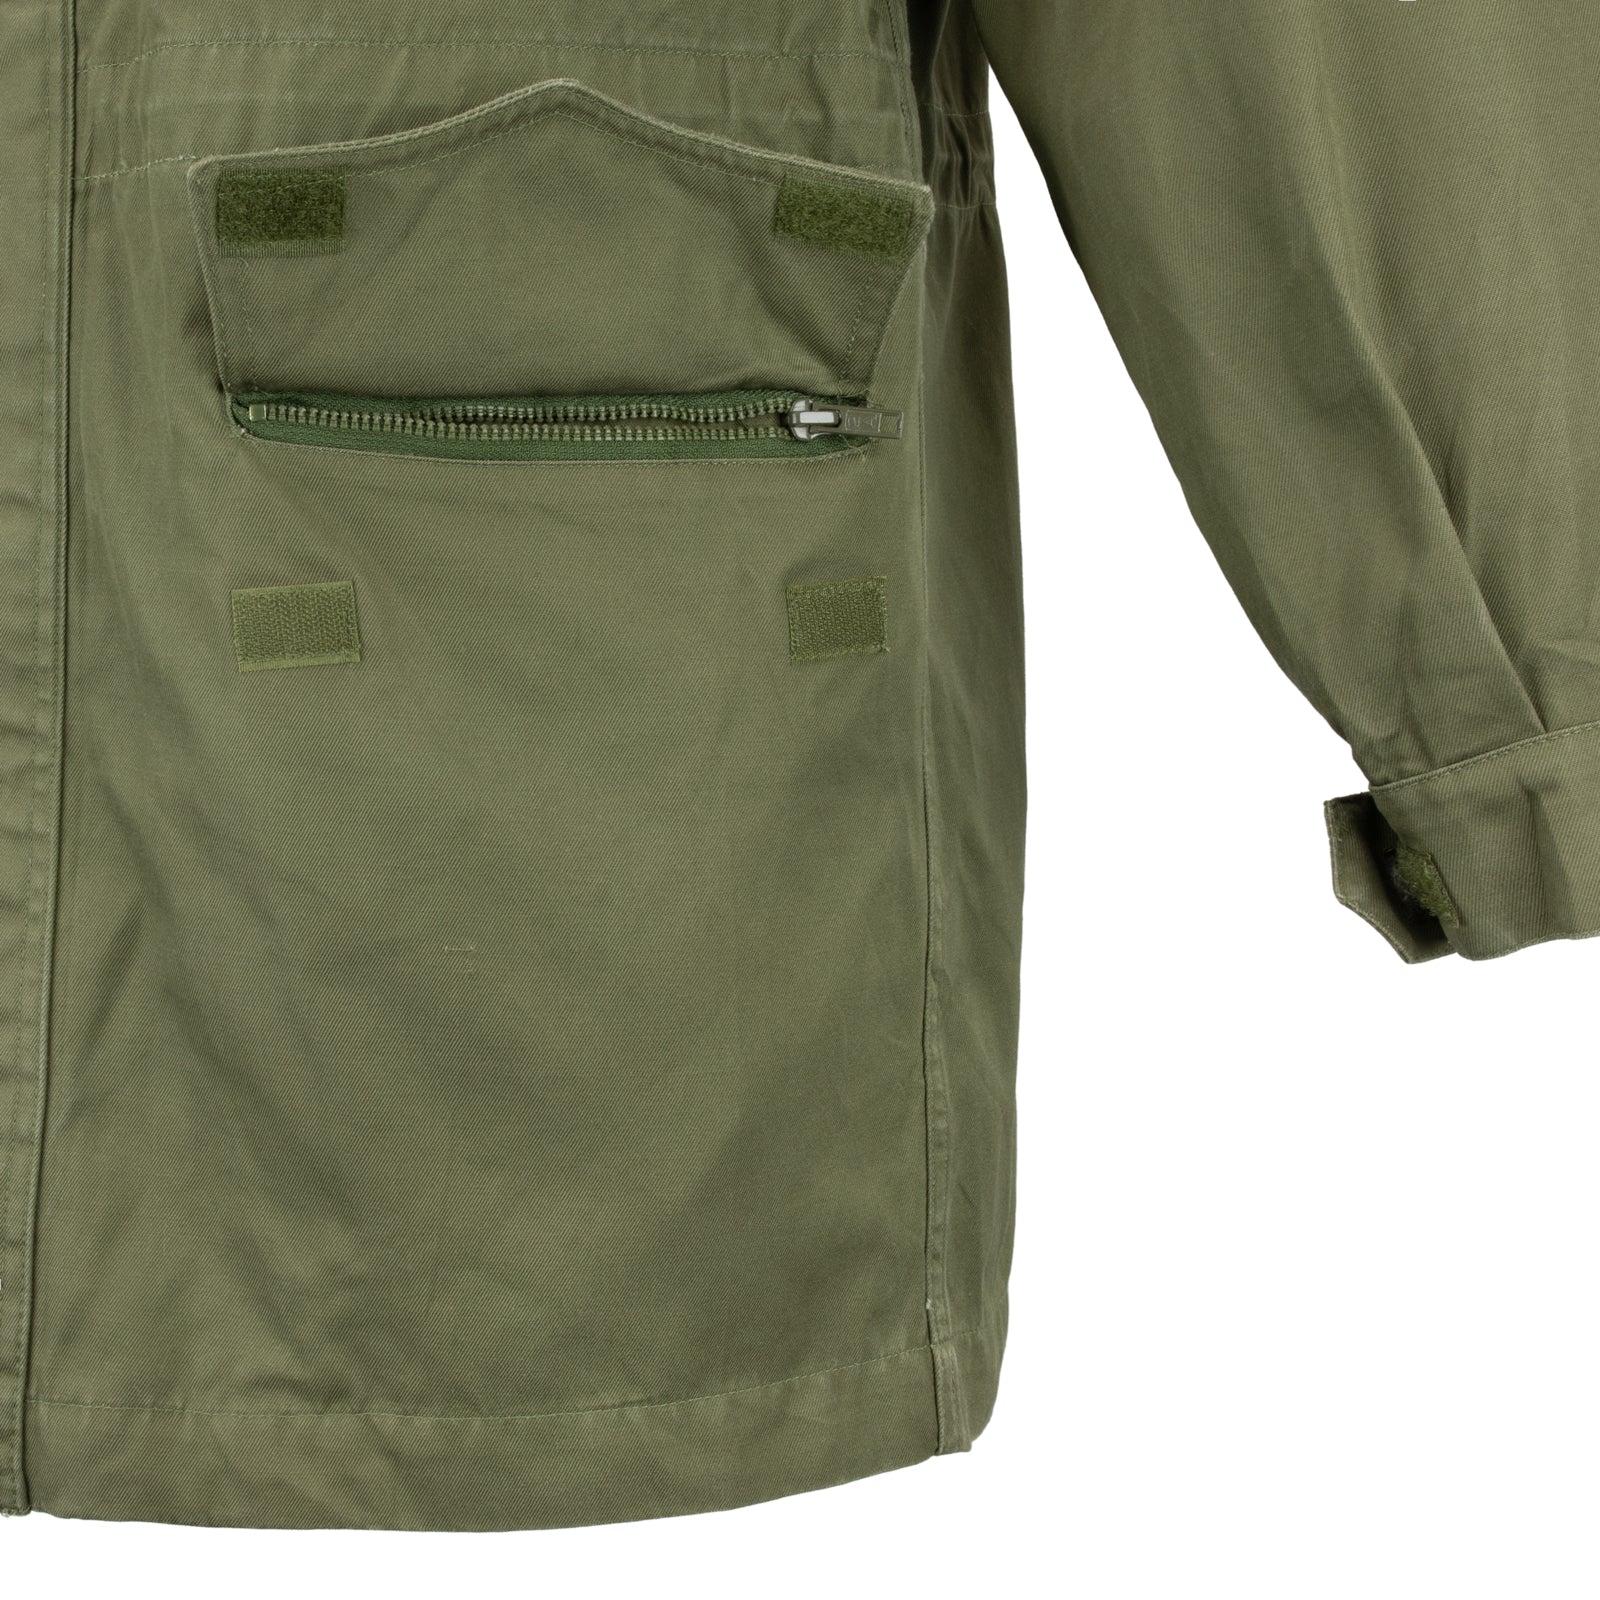 Italian OD Parka With Liner